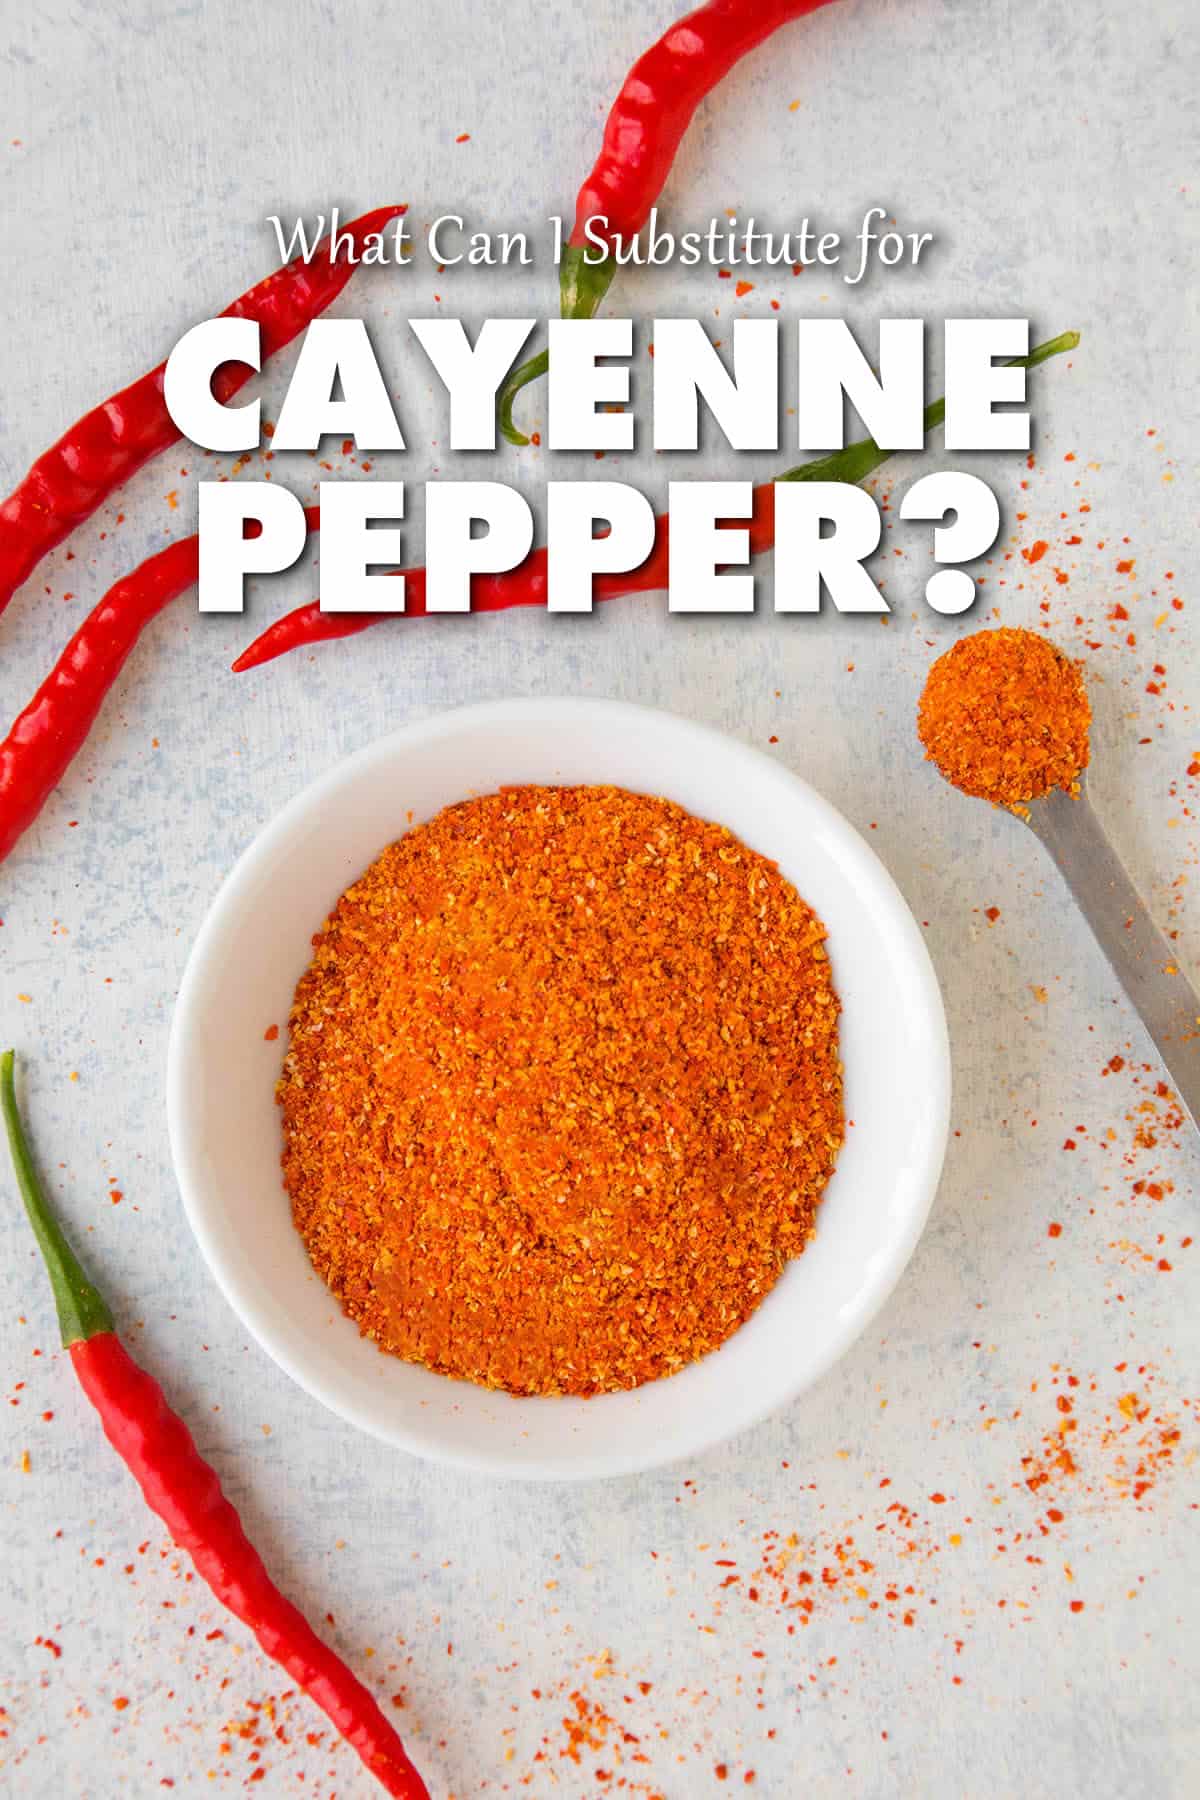 What Can I Substitute for Cayenne Pepper?